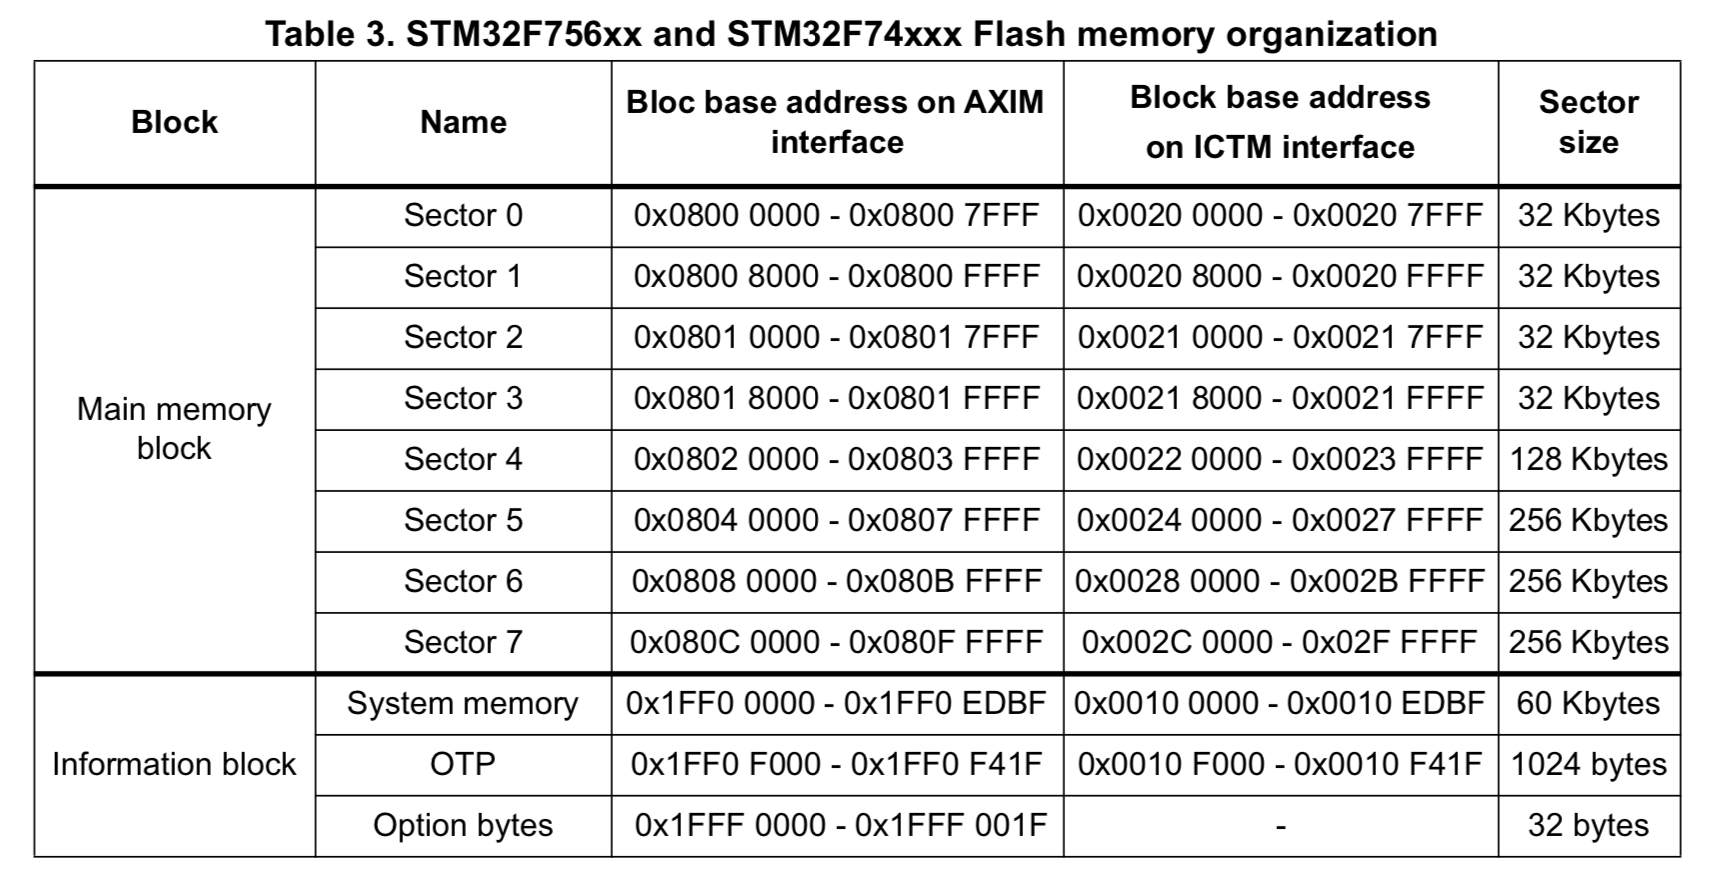 Organization of the Flash memory in a STM32F7 microcontroller